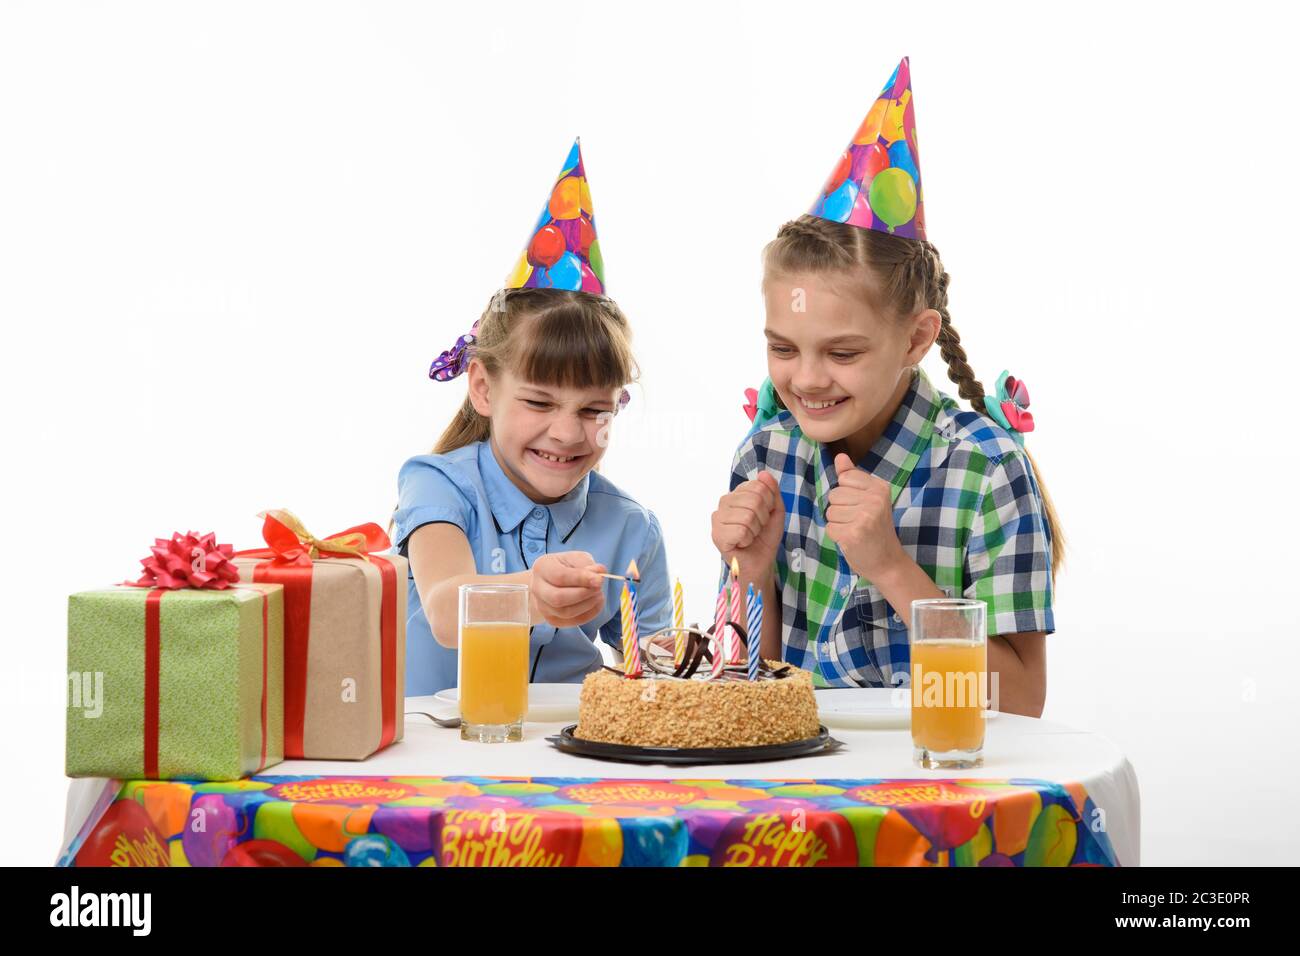 Children independently light candles on a pie at the festive table Stock Photo